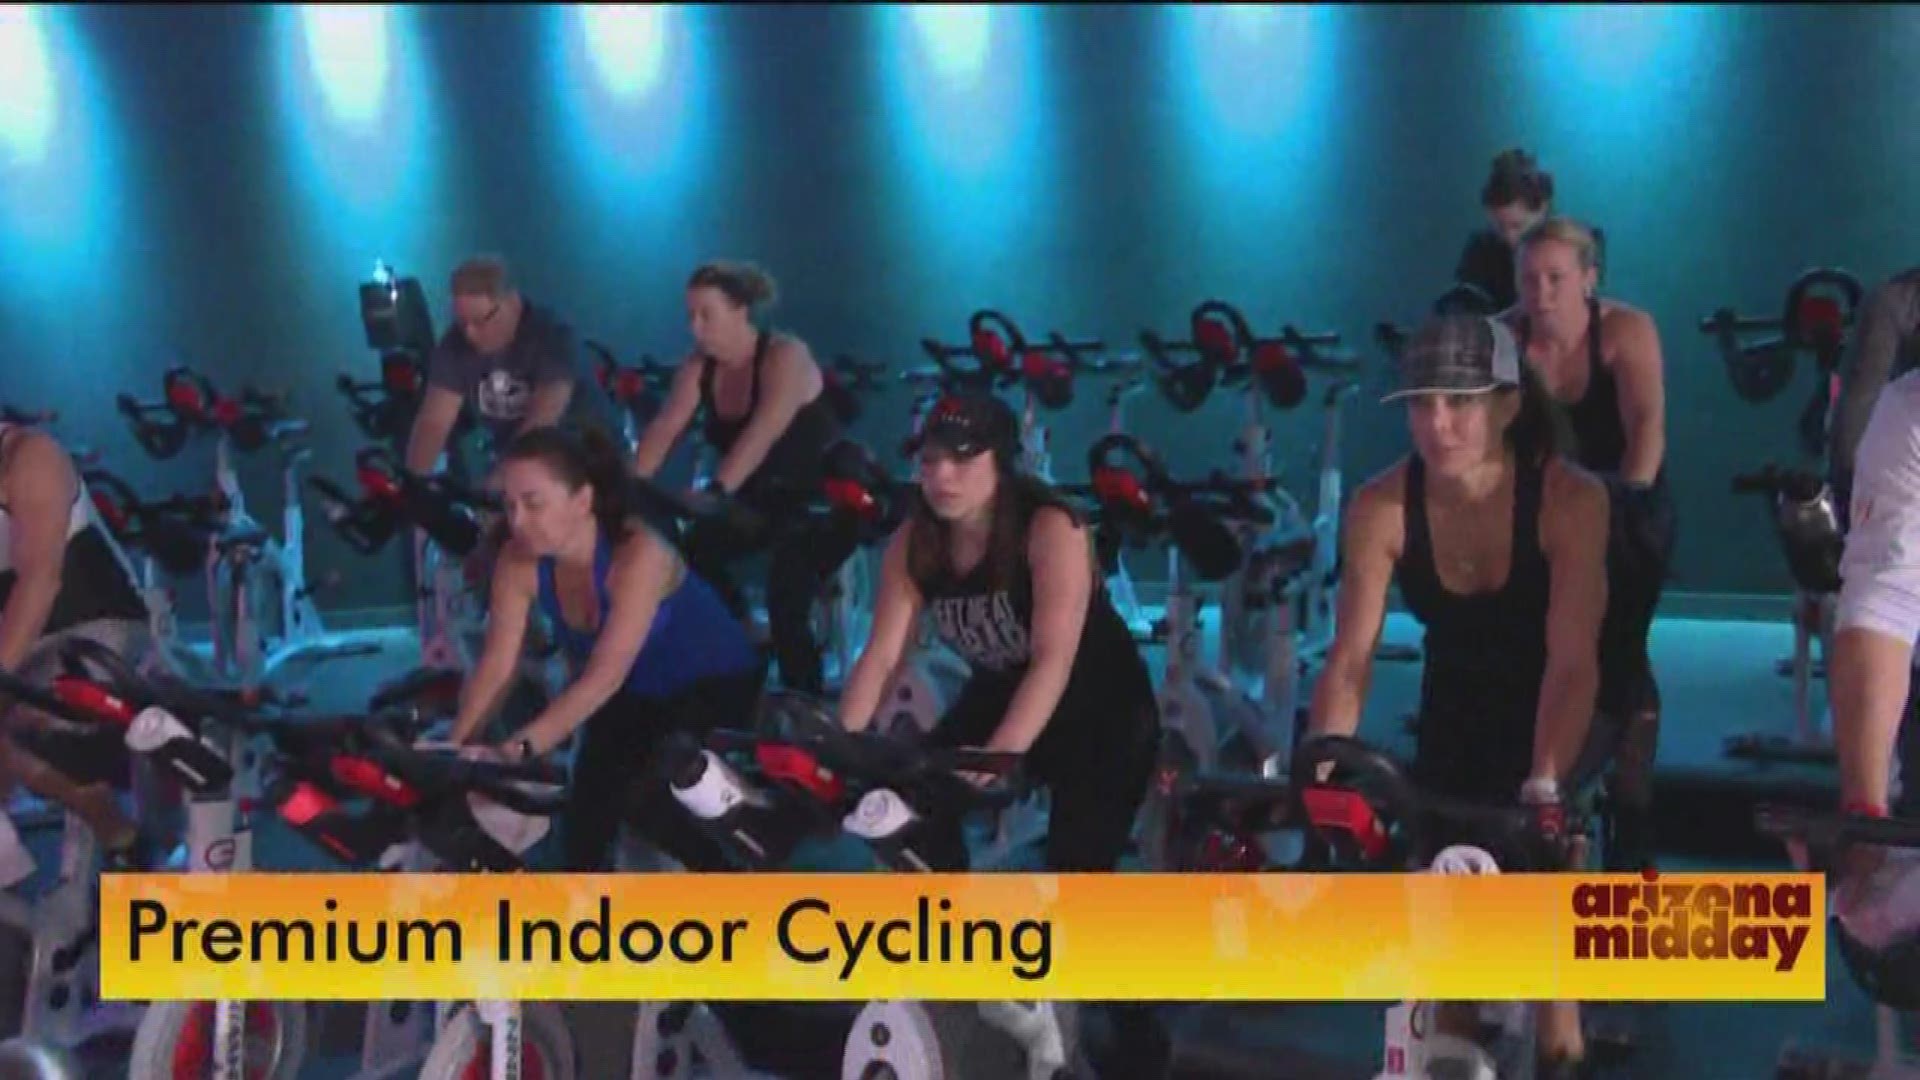 No need to take the bike outside, take a cycling class to get in shape.